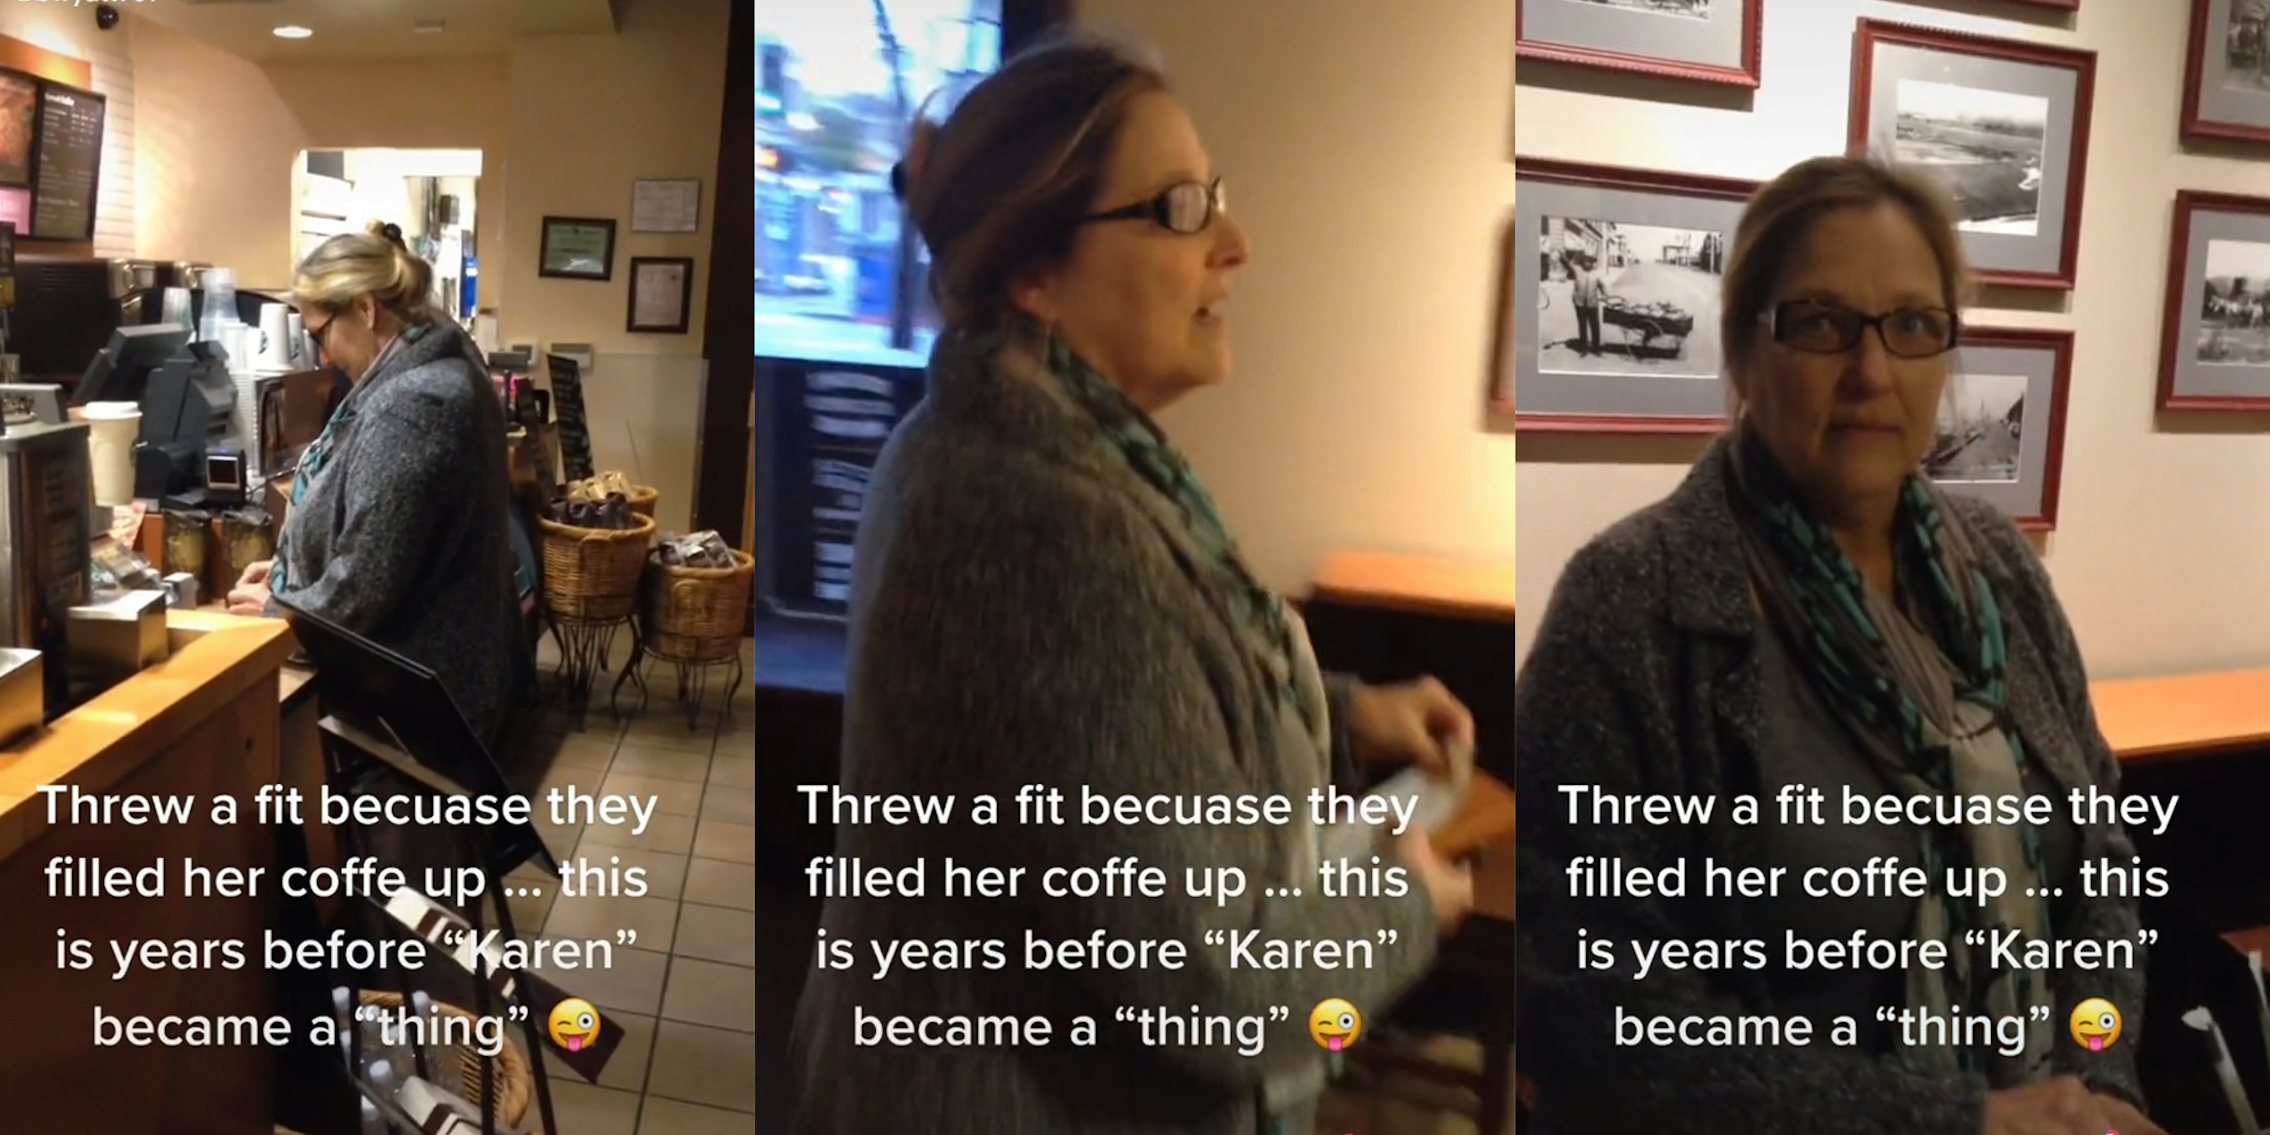 YOU are the one with the problem, girl': Business Karen tries to sabotage  neighboring coffee shop barista by accusing her of theft - FAIL Blog -  Funny Fails